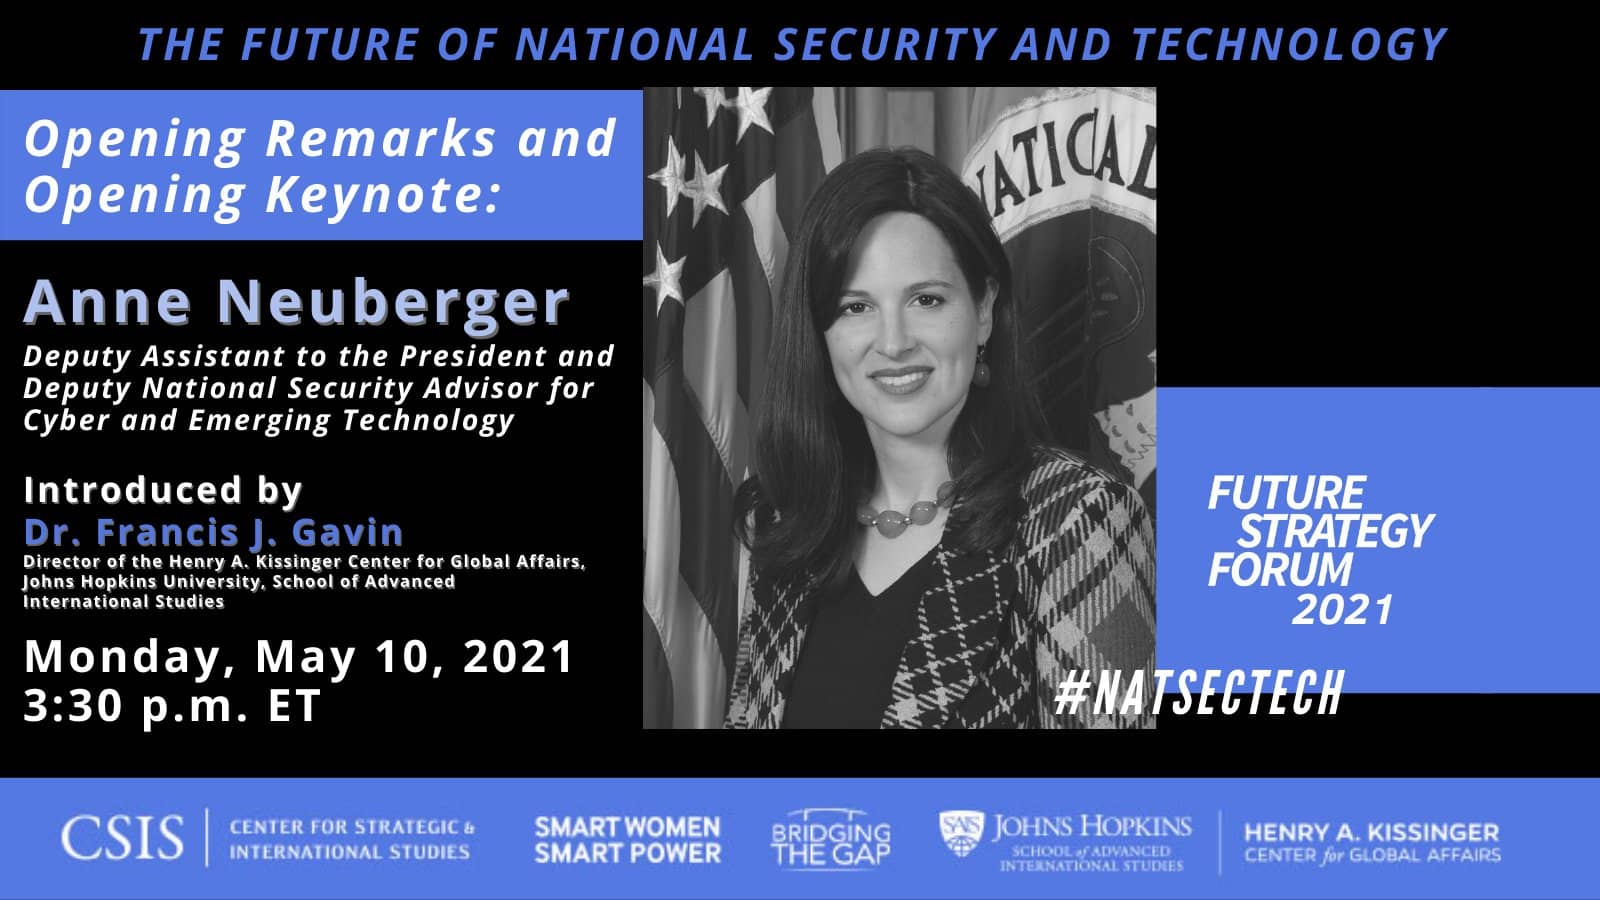 The Future of National Security and Technology. Opening Remarks and Opening Keynote: Anne Neuberger Deputy Asst. to the President and Deputy National Security Advisor for Cyber and Emerging Technology. Introduced by Professor Francis J. Gavin